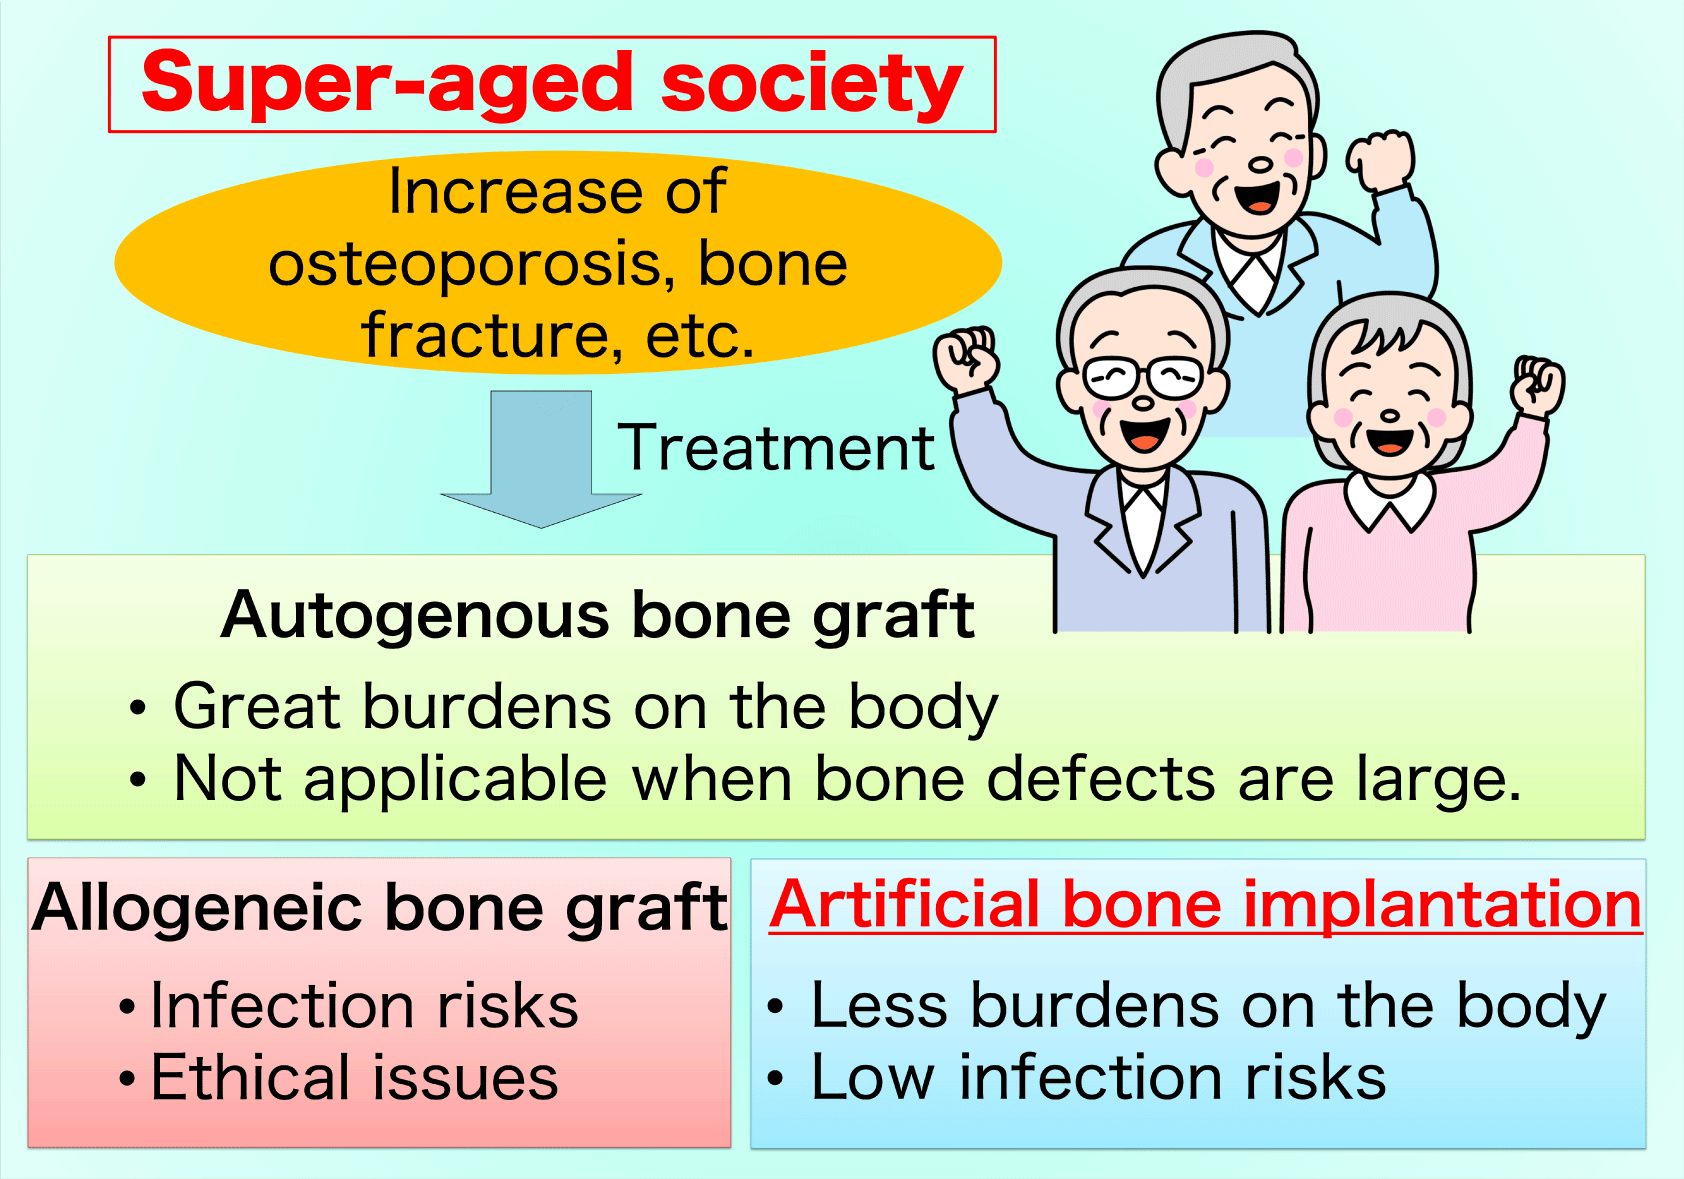 Demand of artificial bone grafts in the super-aged society